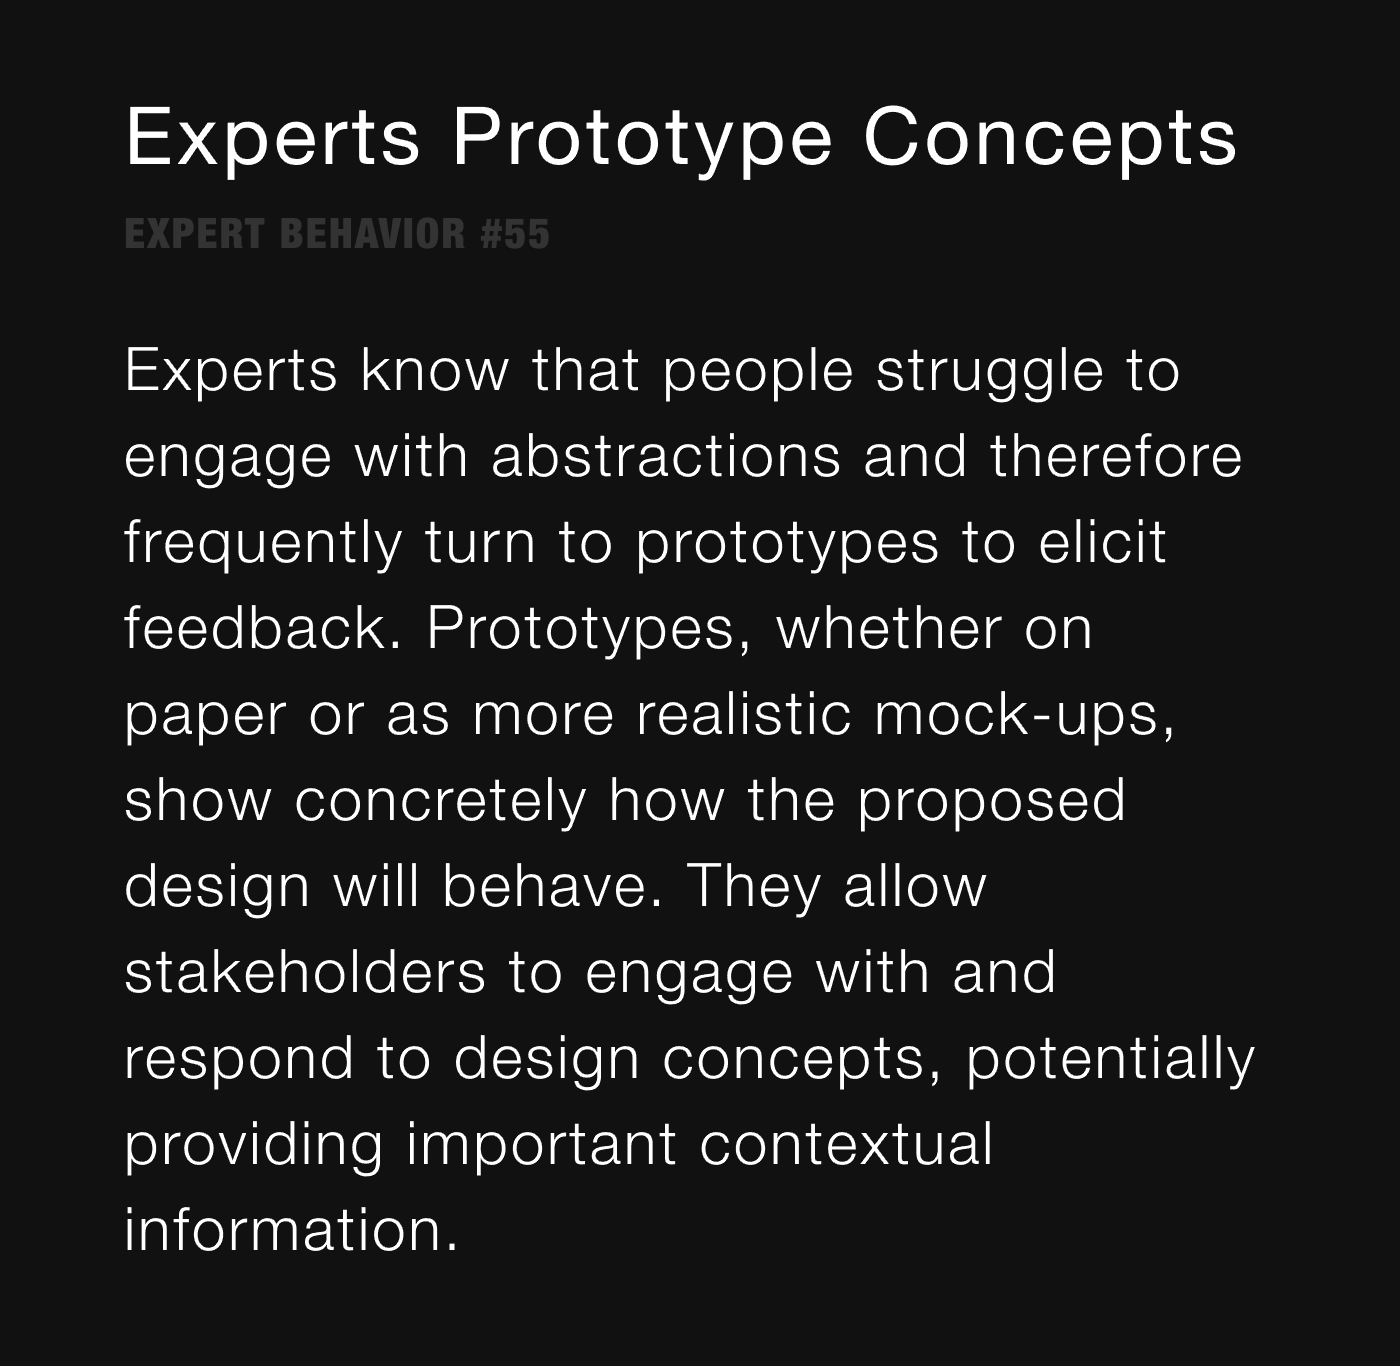 Experts Prototype Concepts - Experts know that people struggle to engage with abstractions and therefore frequently turn to prototypes to elicit feedback. Prototypes, whether on paper or as more realistic mock-ups, show concretely how the proposed design will behave. They allow stakeholders to engage with and respond to design concepts, potentially providing important contextual information. 